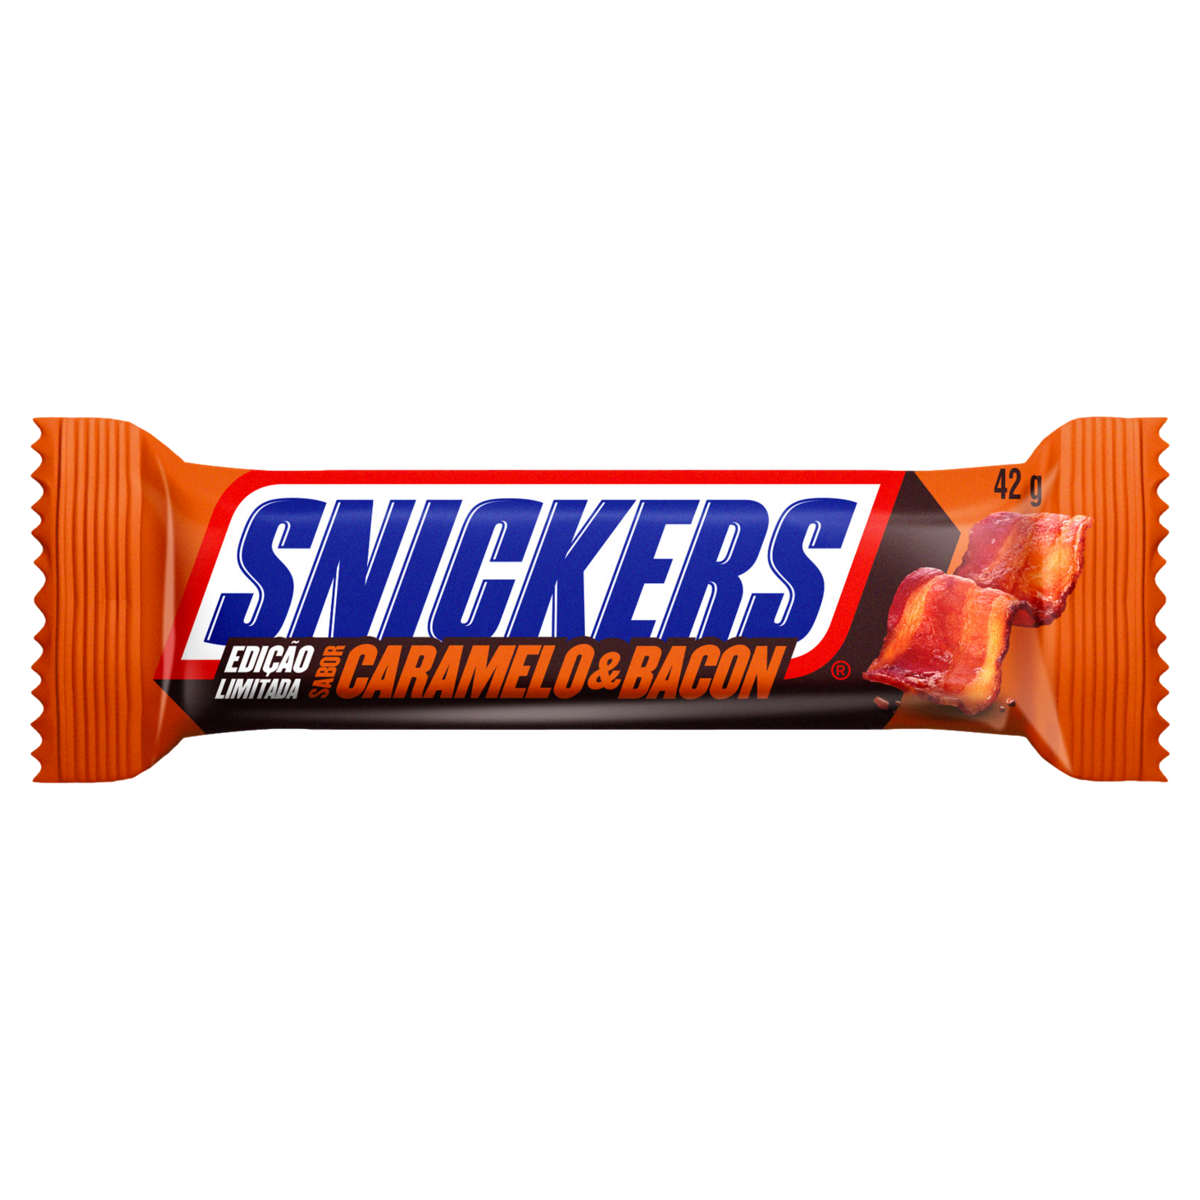 7896423451535 - CHOCOLATE CARAMELO & BACON SNICKERS PACOTE 42G